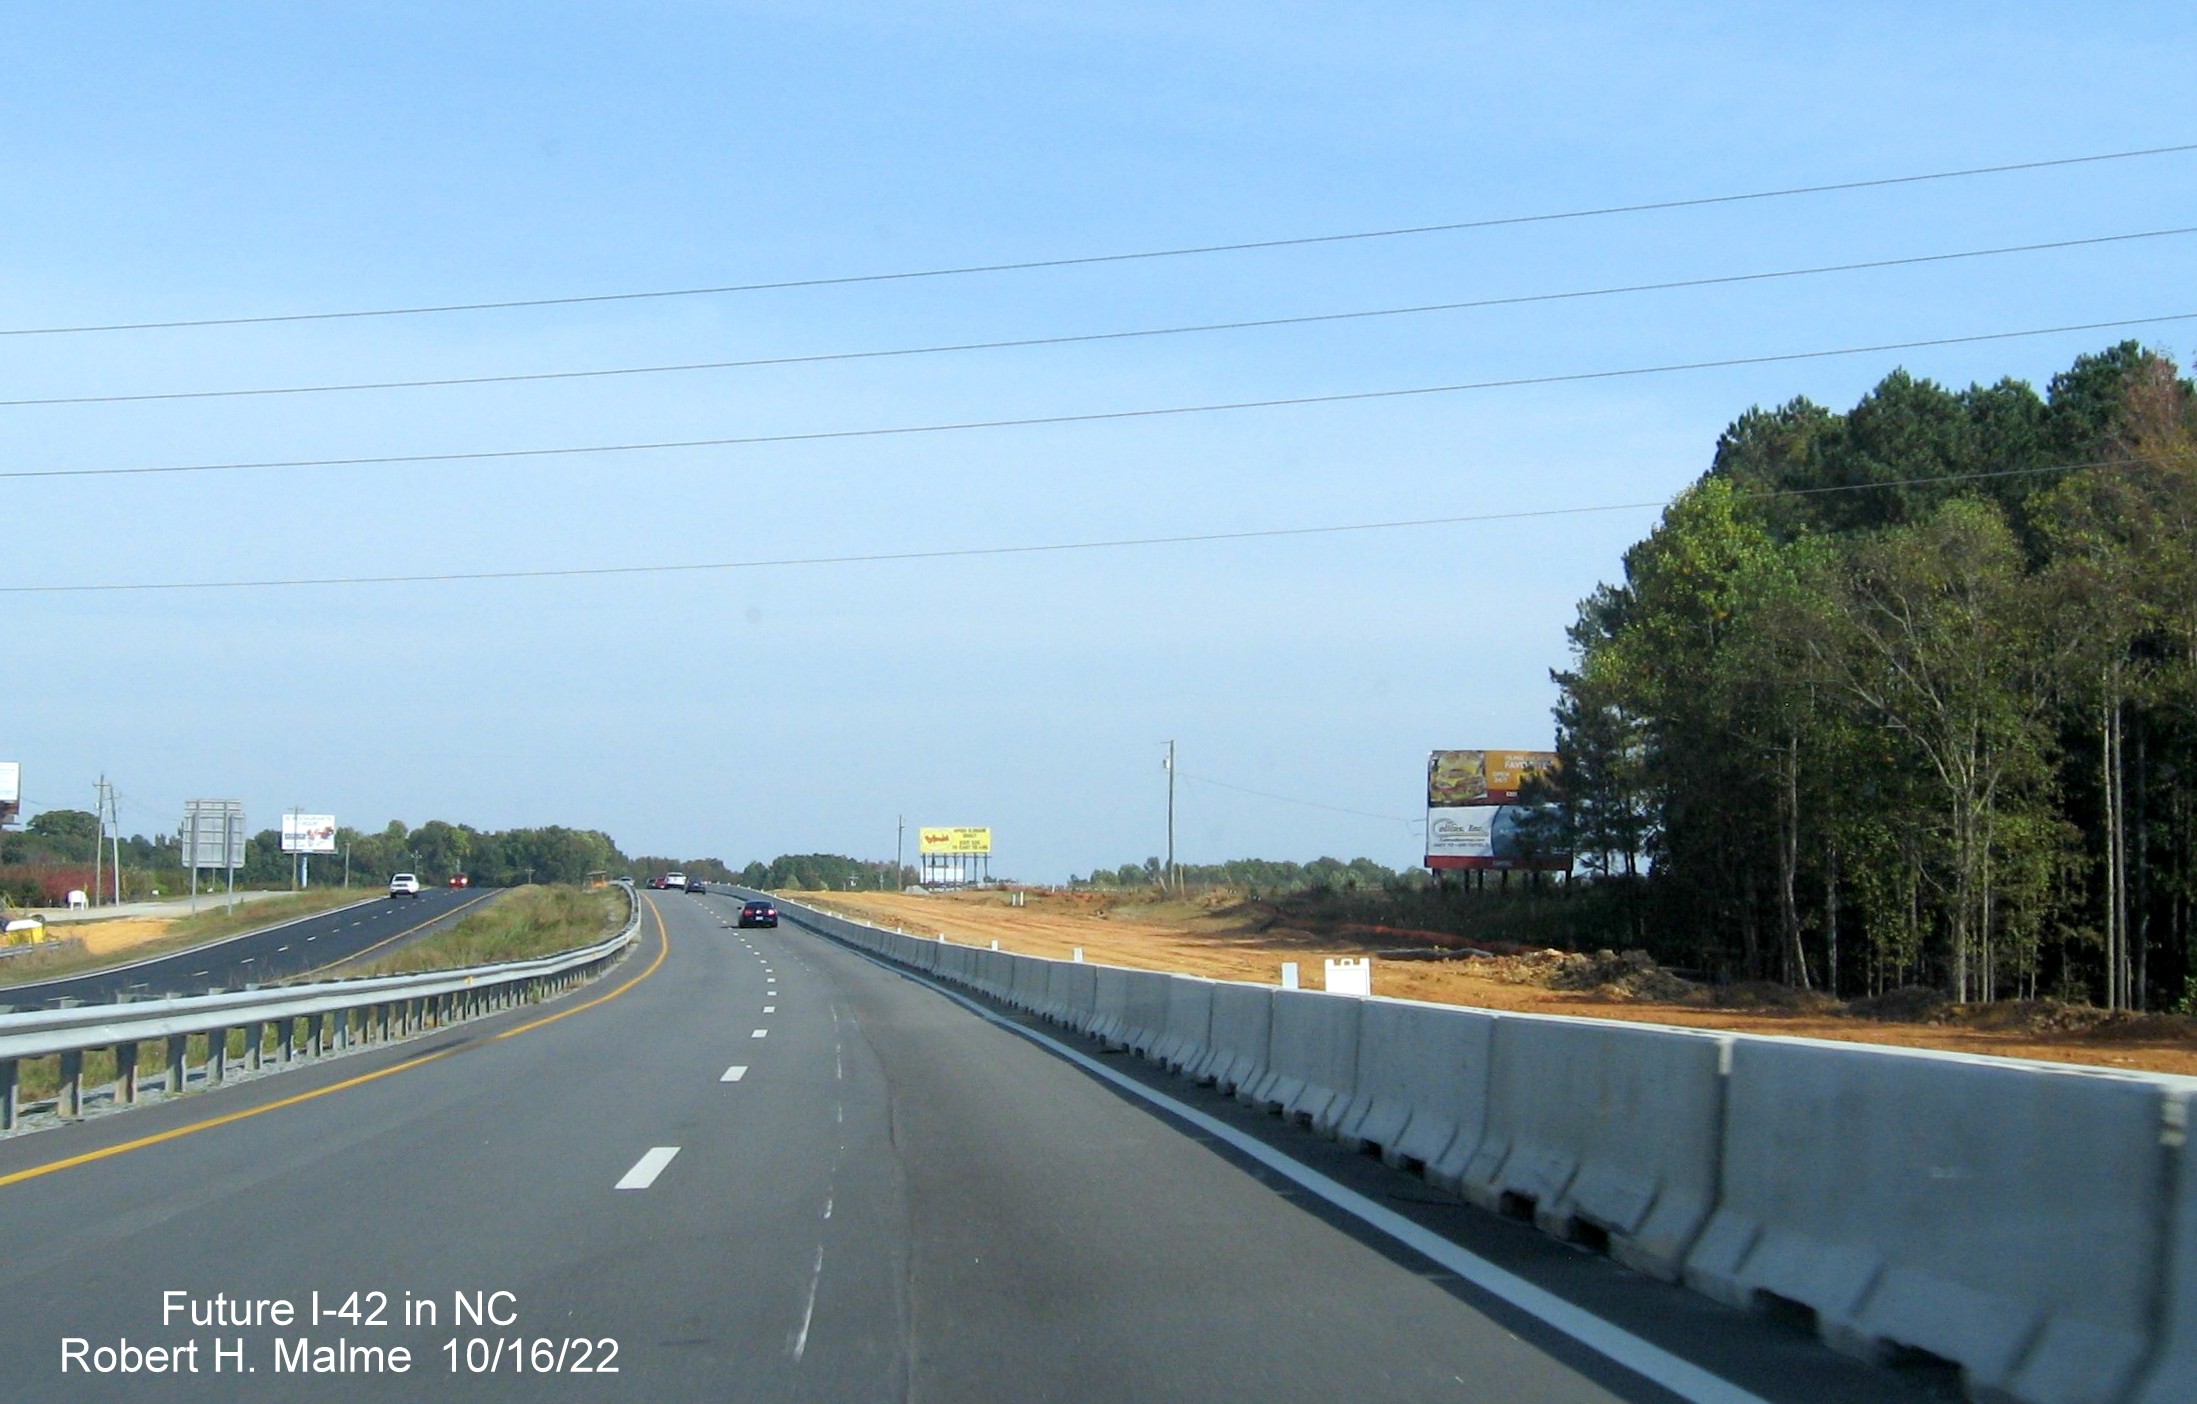 Image of graded new lanes for Future I-42 east on US 70 East in Clayton, October 2022